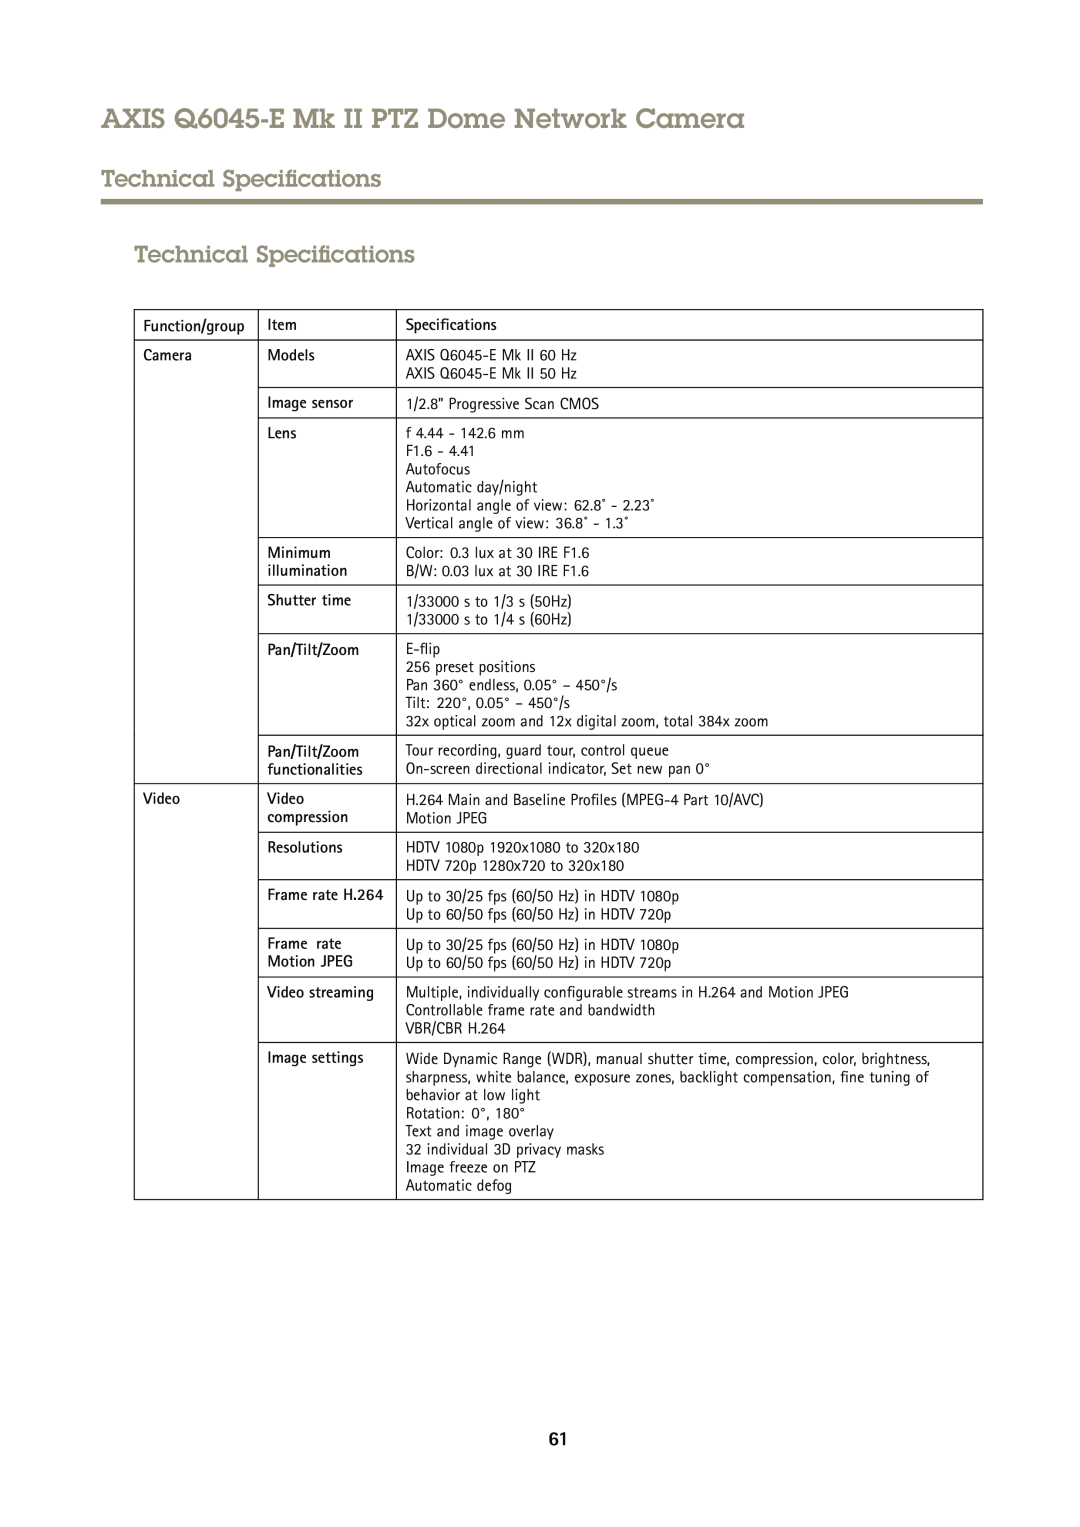 Axis Communications Technical Specifications Technical Specifications, AXIS Q6045-EMk II PTZ Dome Network Camera, Lens 